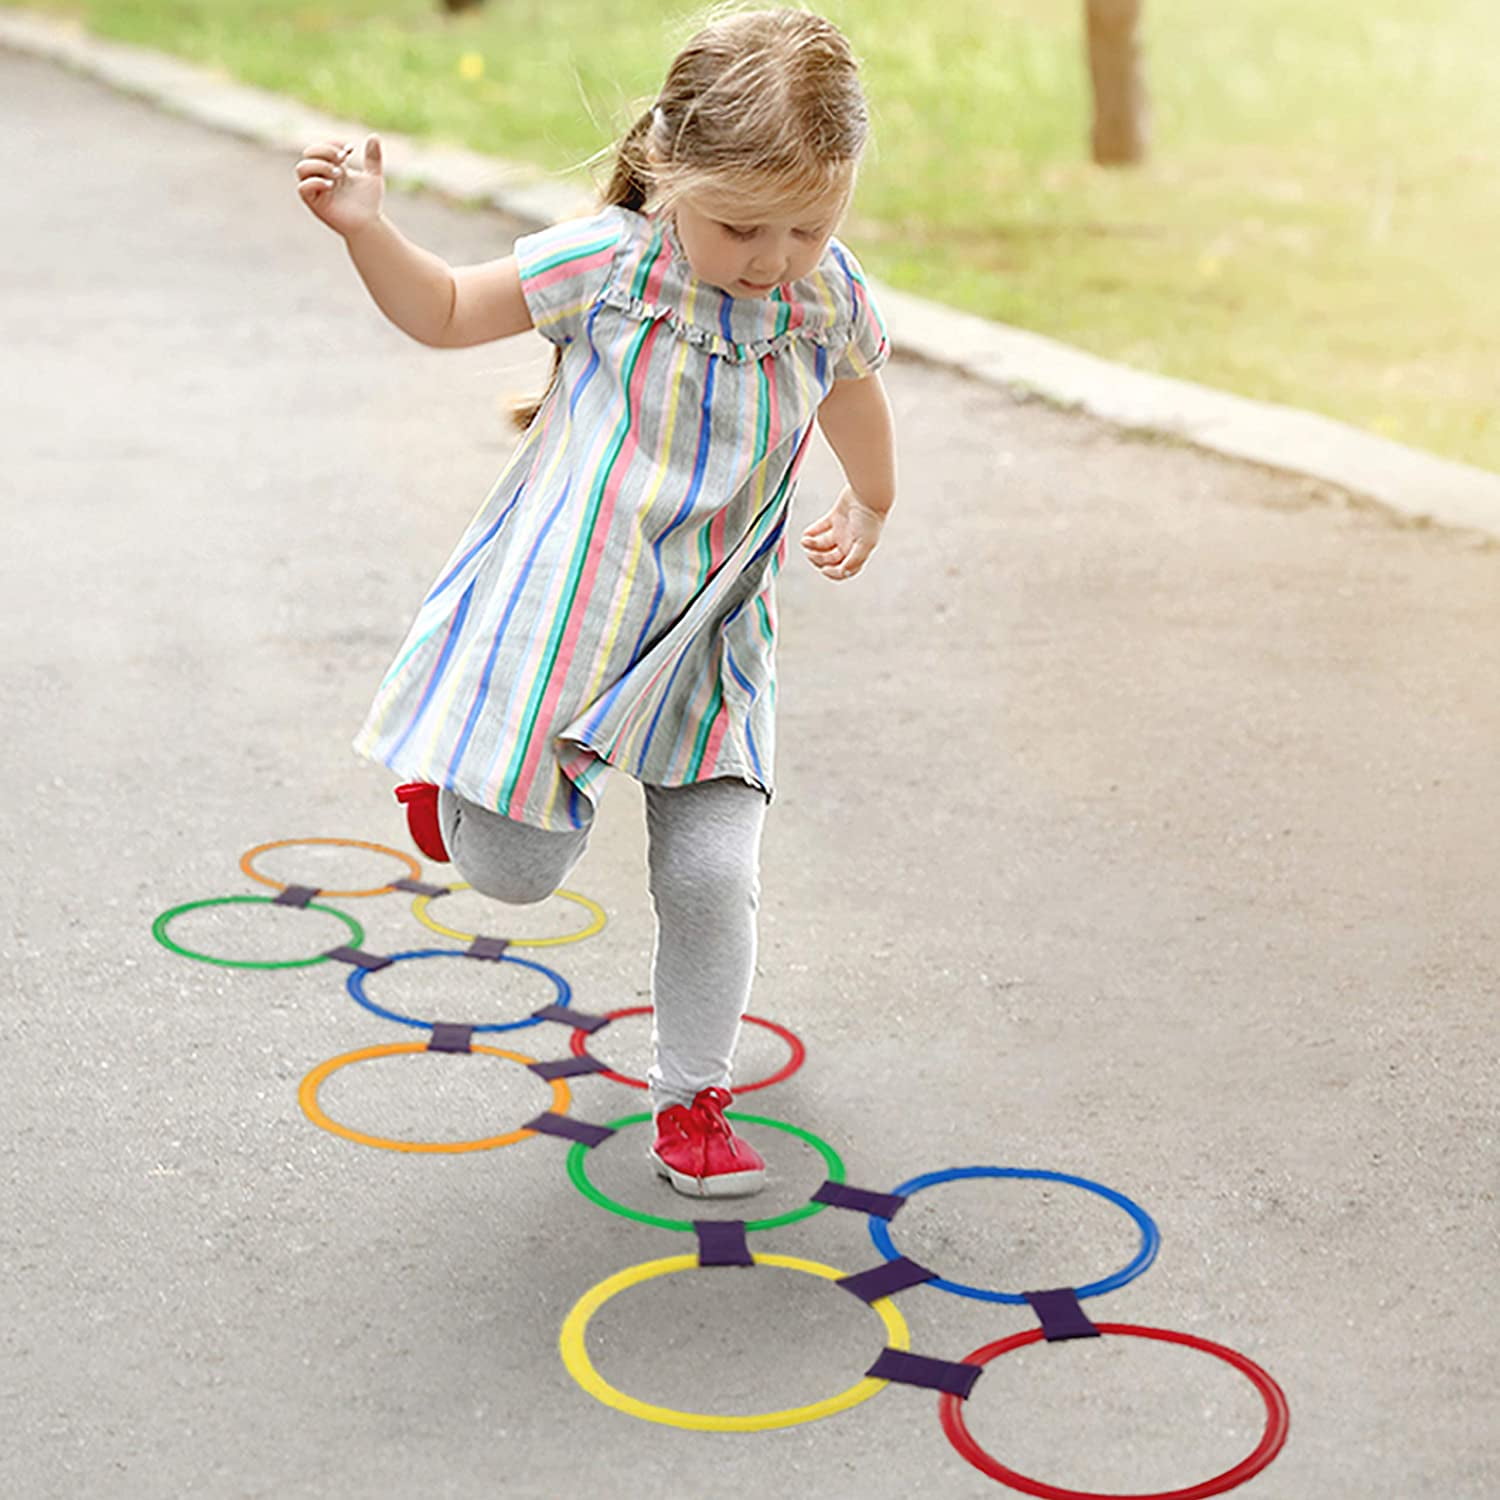 Vbest life Jumping Rings Hopscotch Ring Set 5Pcs Multi-Colored Plastic Rings and 5 Connectors for Kids Indoor Outdoor Playing